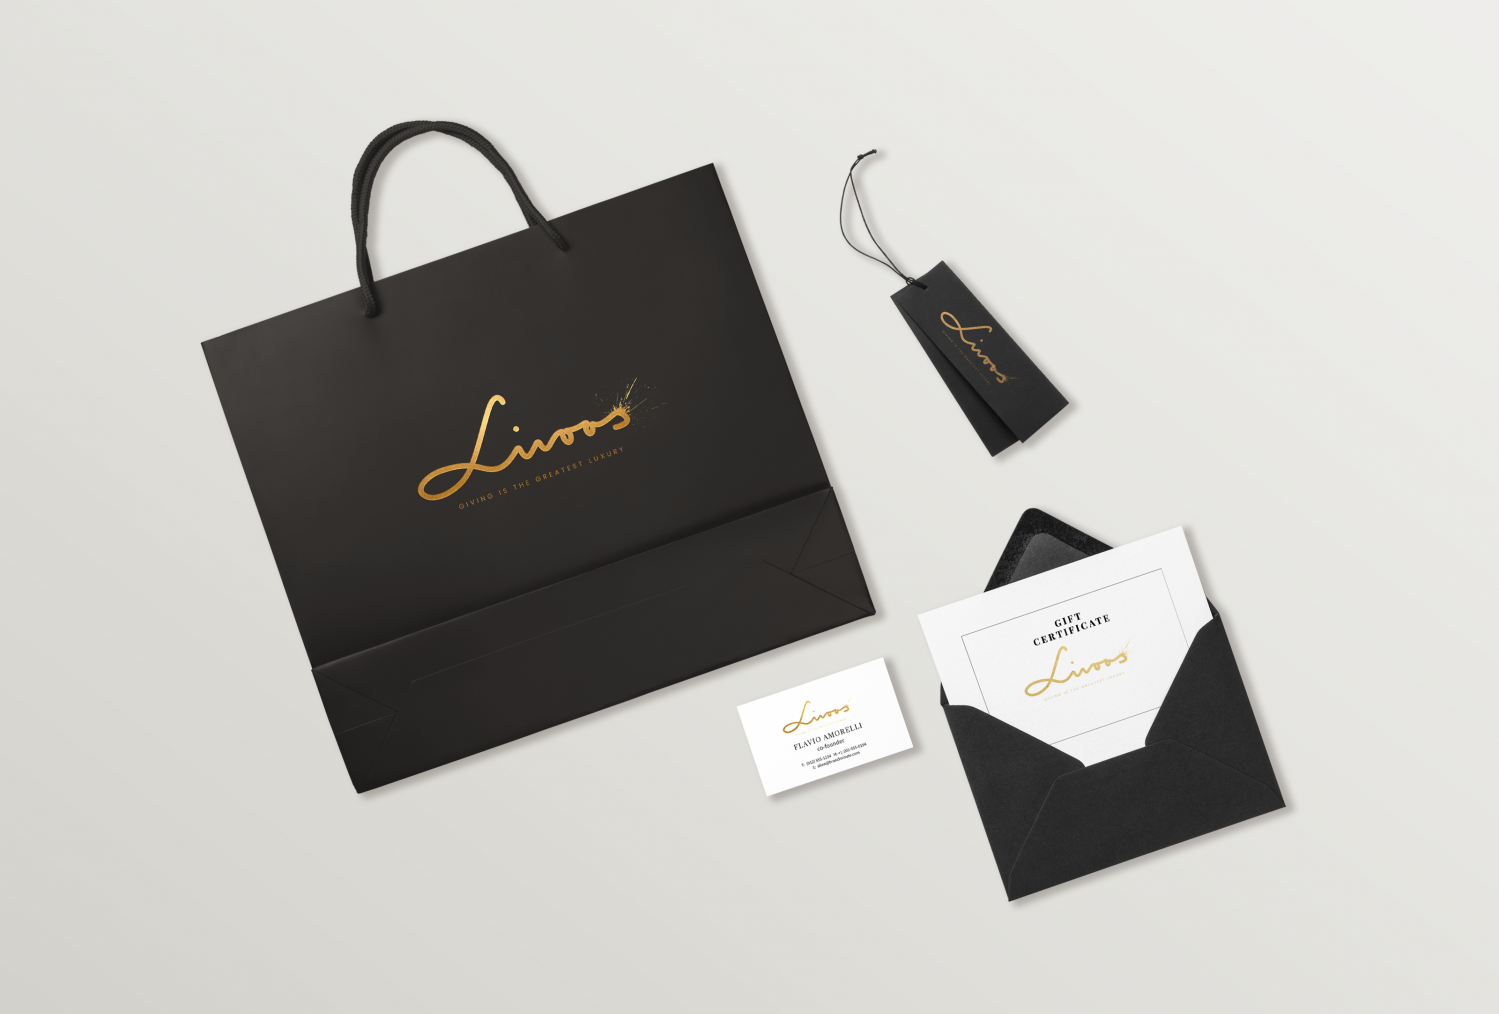 Identity Design and Art Direction for luxury retail brand